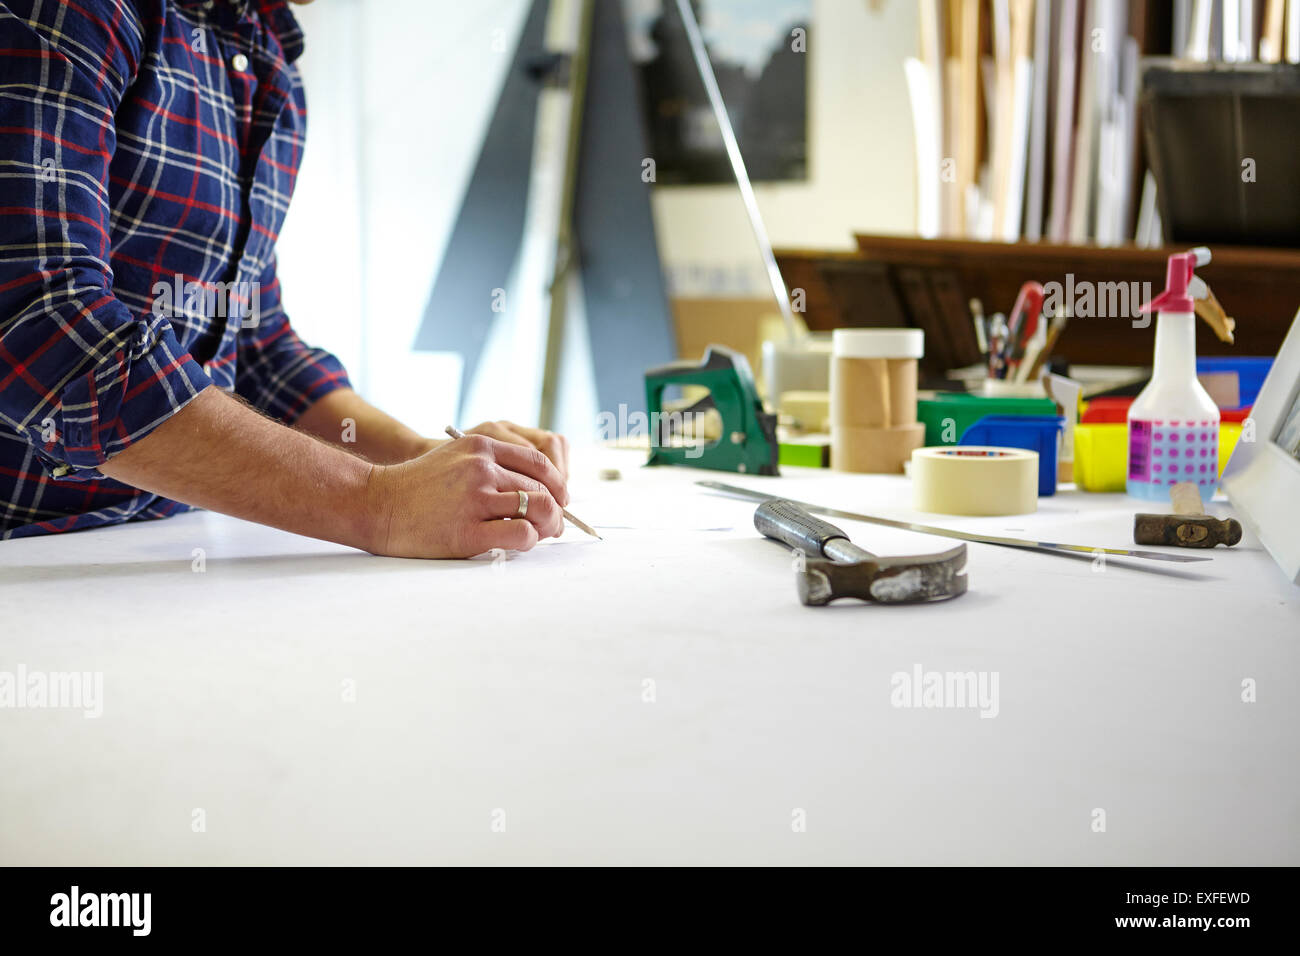 Mid adult man writing measurement on workbench in picture framers workshop Stock Photo